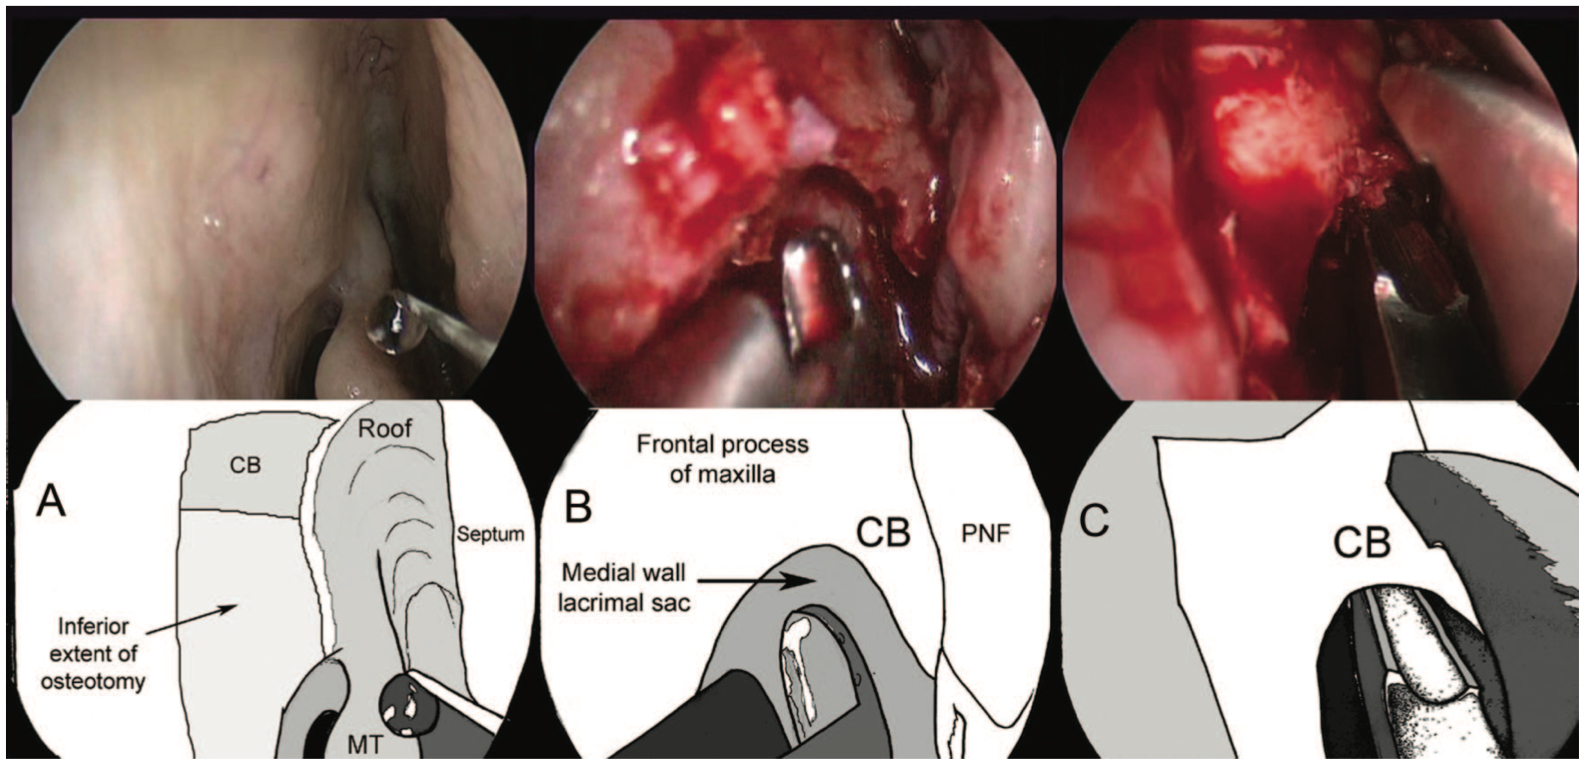 Bony Osteotomy in an Endoscopic Dacryocystorhinostomy: A, The right lateral nasal wall prior to surgery with a schematic illustration showing the underlying position of the osteot-
omy. The ceiling beam will overlie the fundus of the lacrimal sac, and removal of its full extent was facilitated by the nibbler. B, Fur- ther bone work with the up-biting punch is becoming difficult due to bone orientation and angulation. C, Further removal of the ceiling beam was achieved with the nibbler. CB, ceiling beam; PNF, posterior nasal flap; MT, middle turbinate.